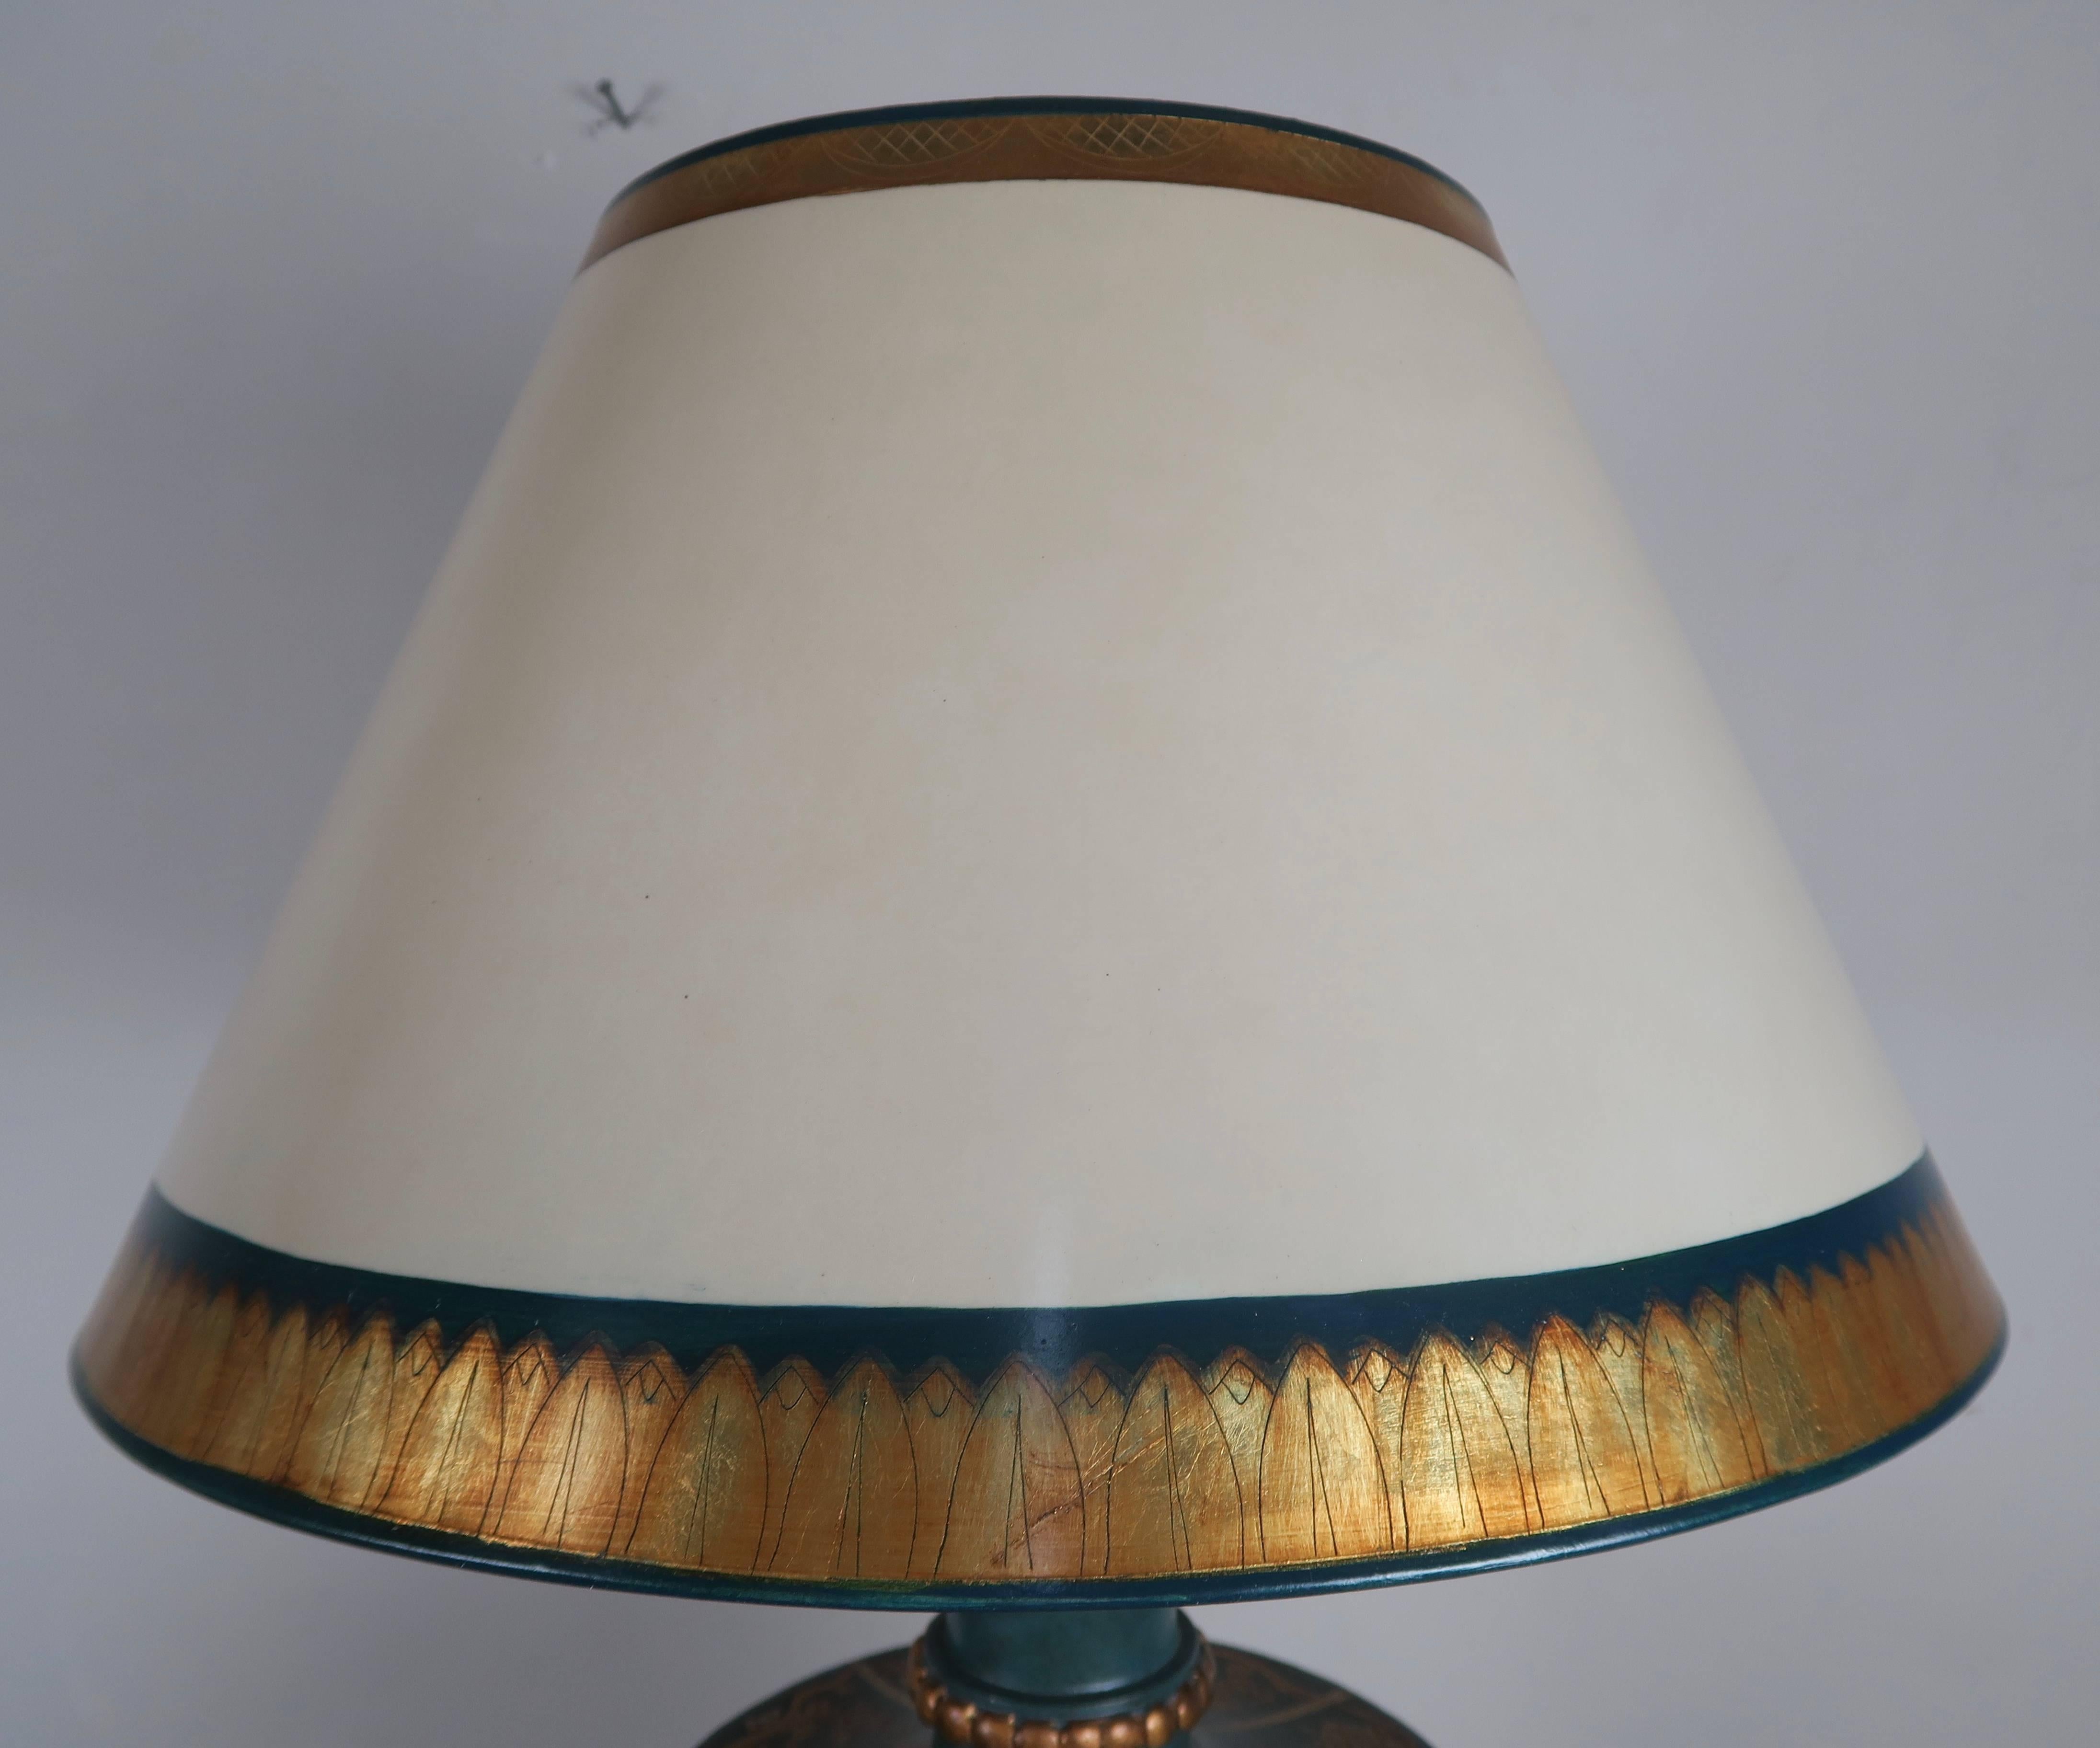 Hand-Painted Teal and Gold Chinoiserie Painted Colored Lamps, Pair